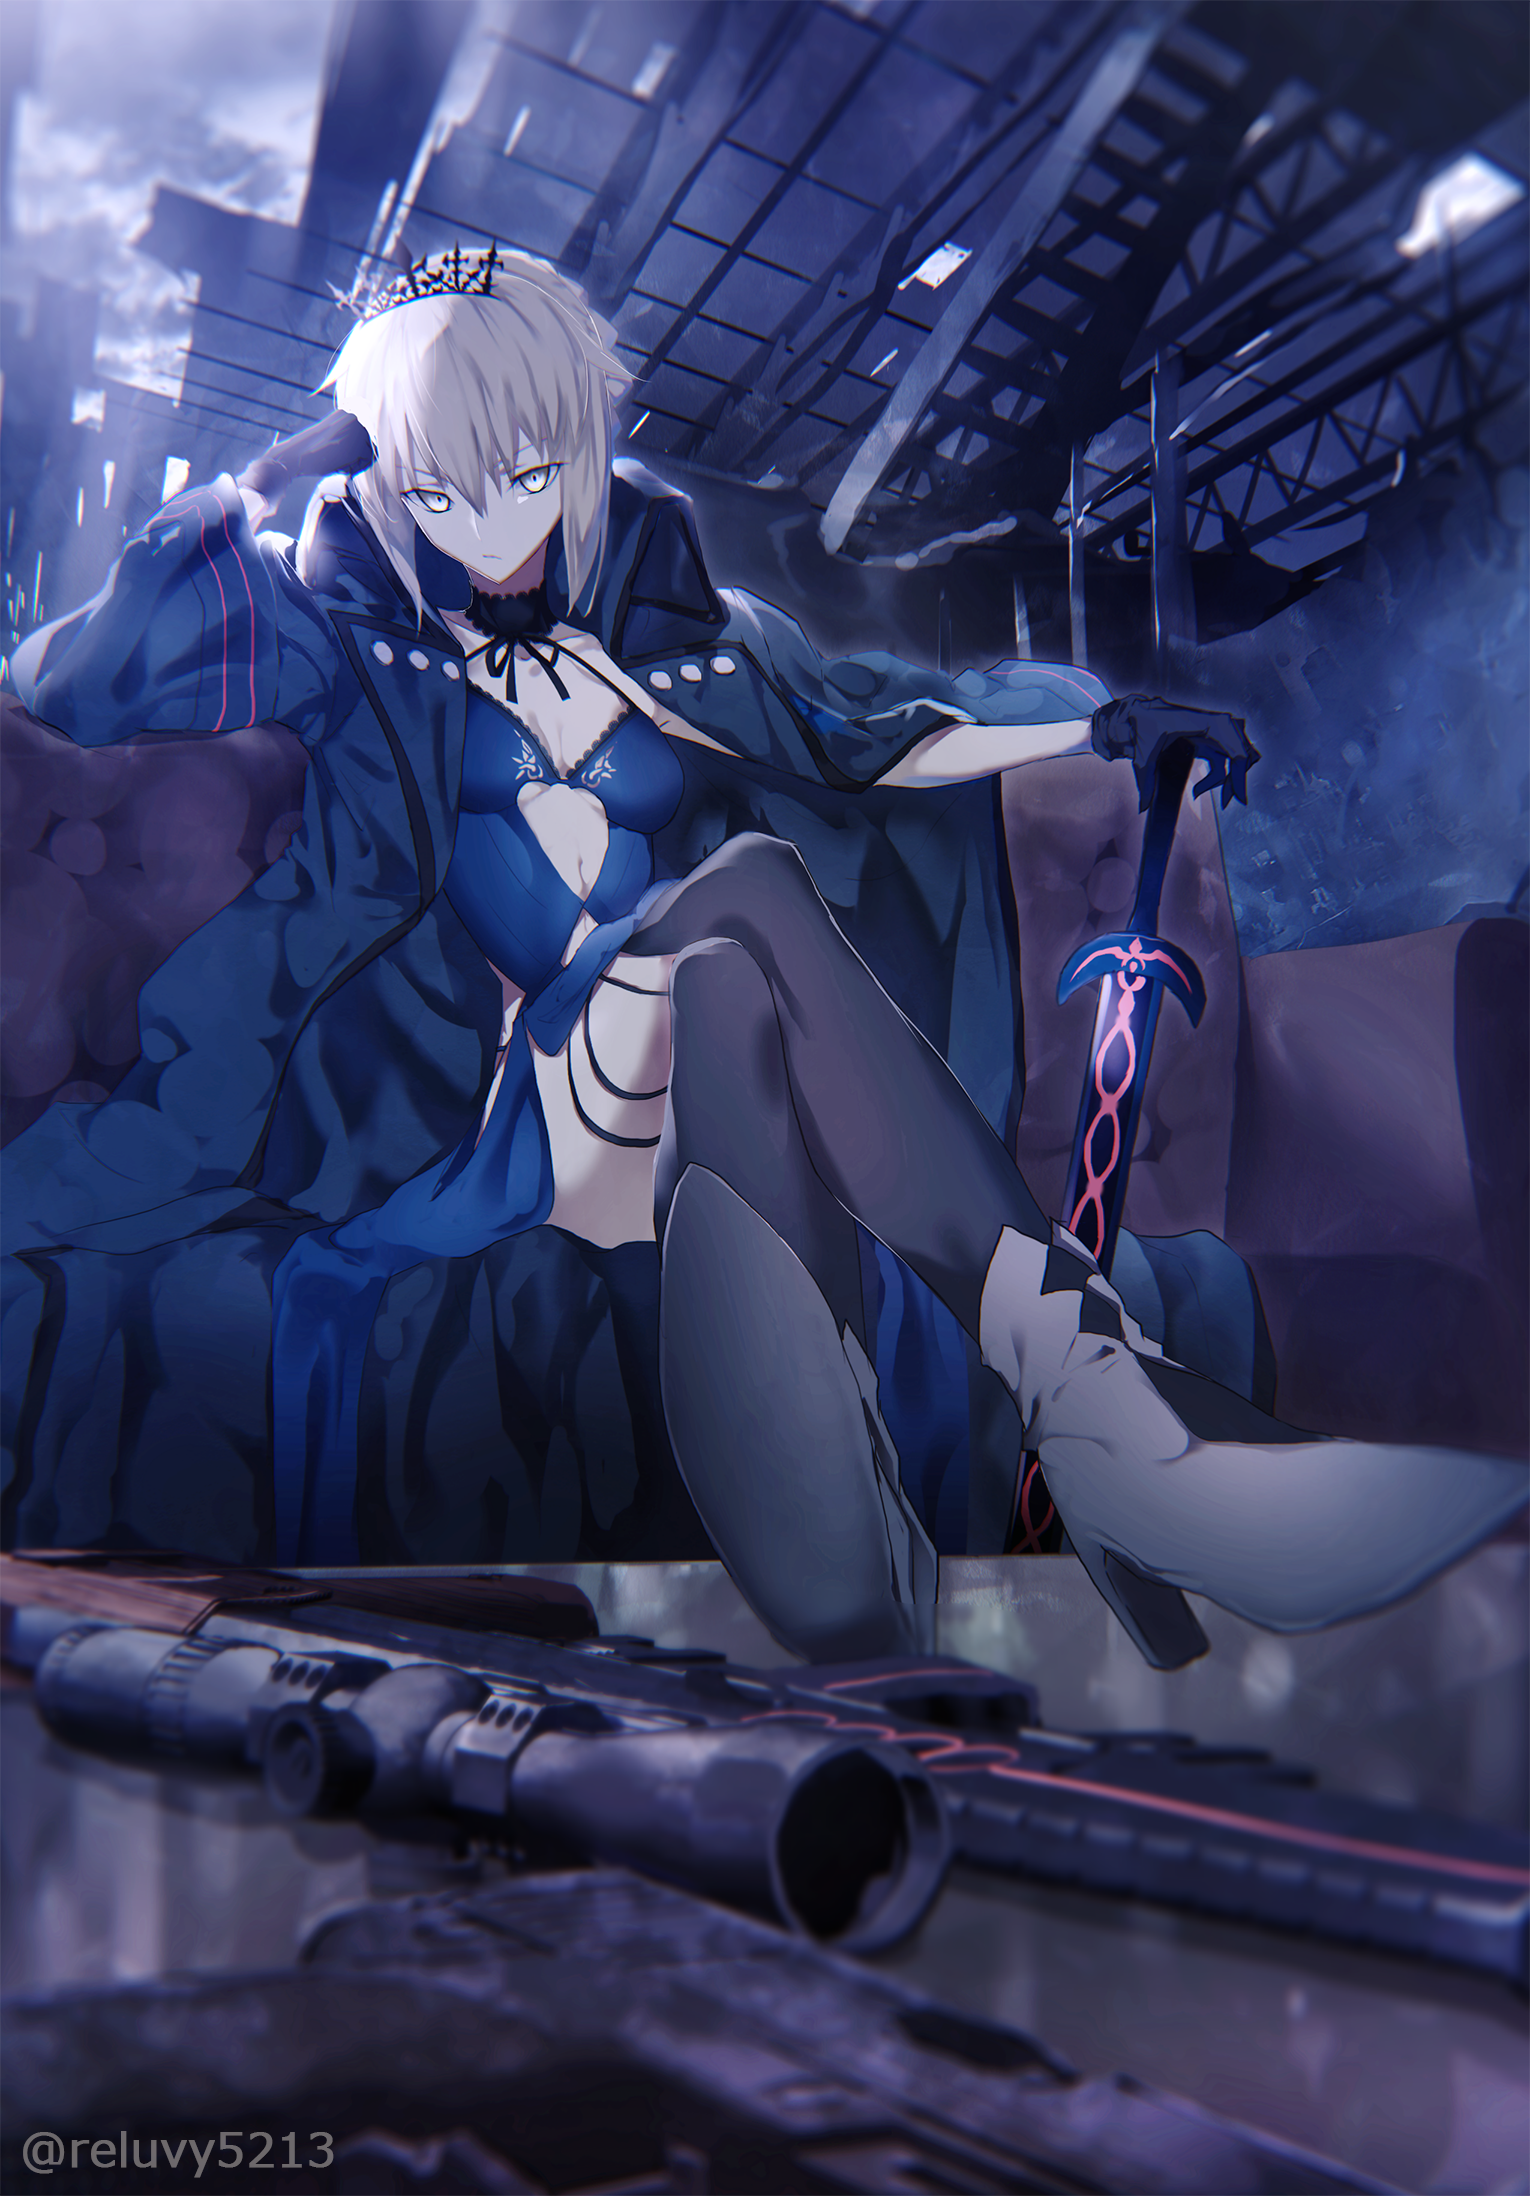 Anime 1530x2196 Fate series Fate/Grand Order anime girls 2D fan art portrait display small boobs fantasy weapon crown yellow eyes cleavage blue dress sword Saber Alter sniper rifle black stockings blonde Artoria Pendragon